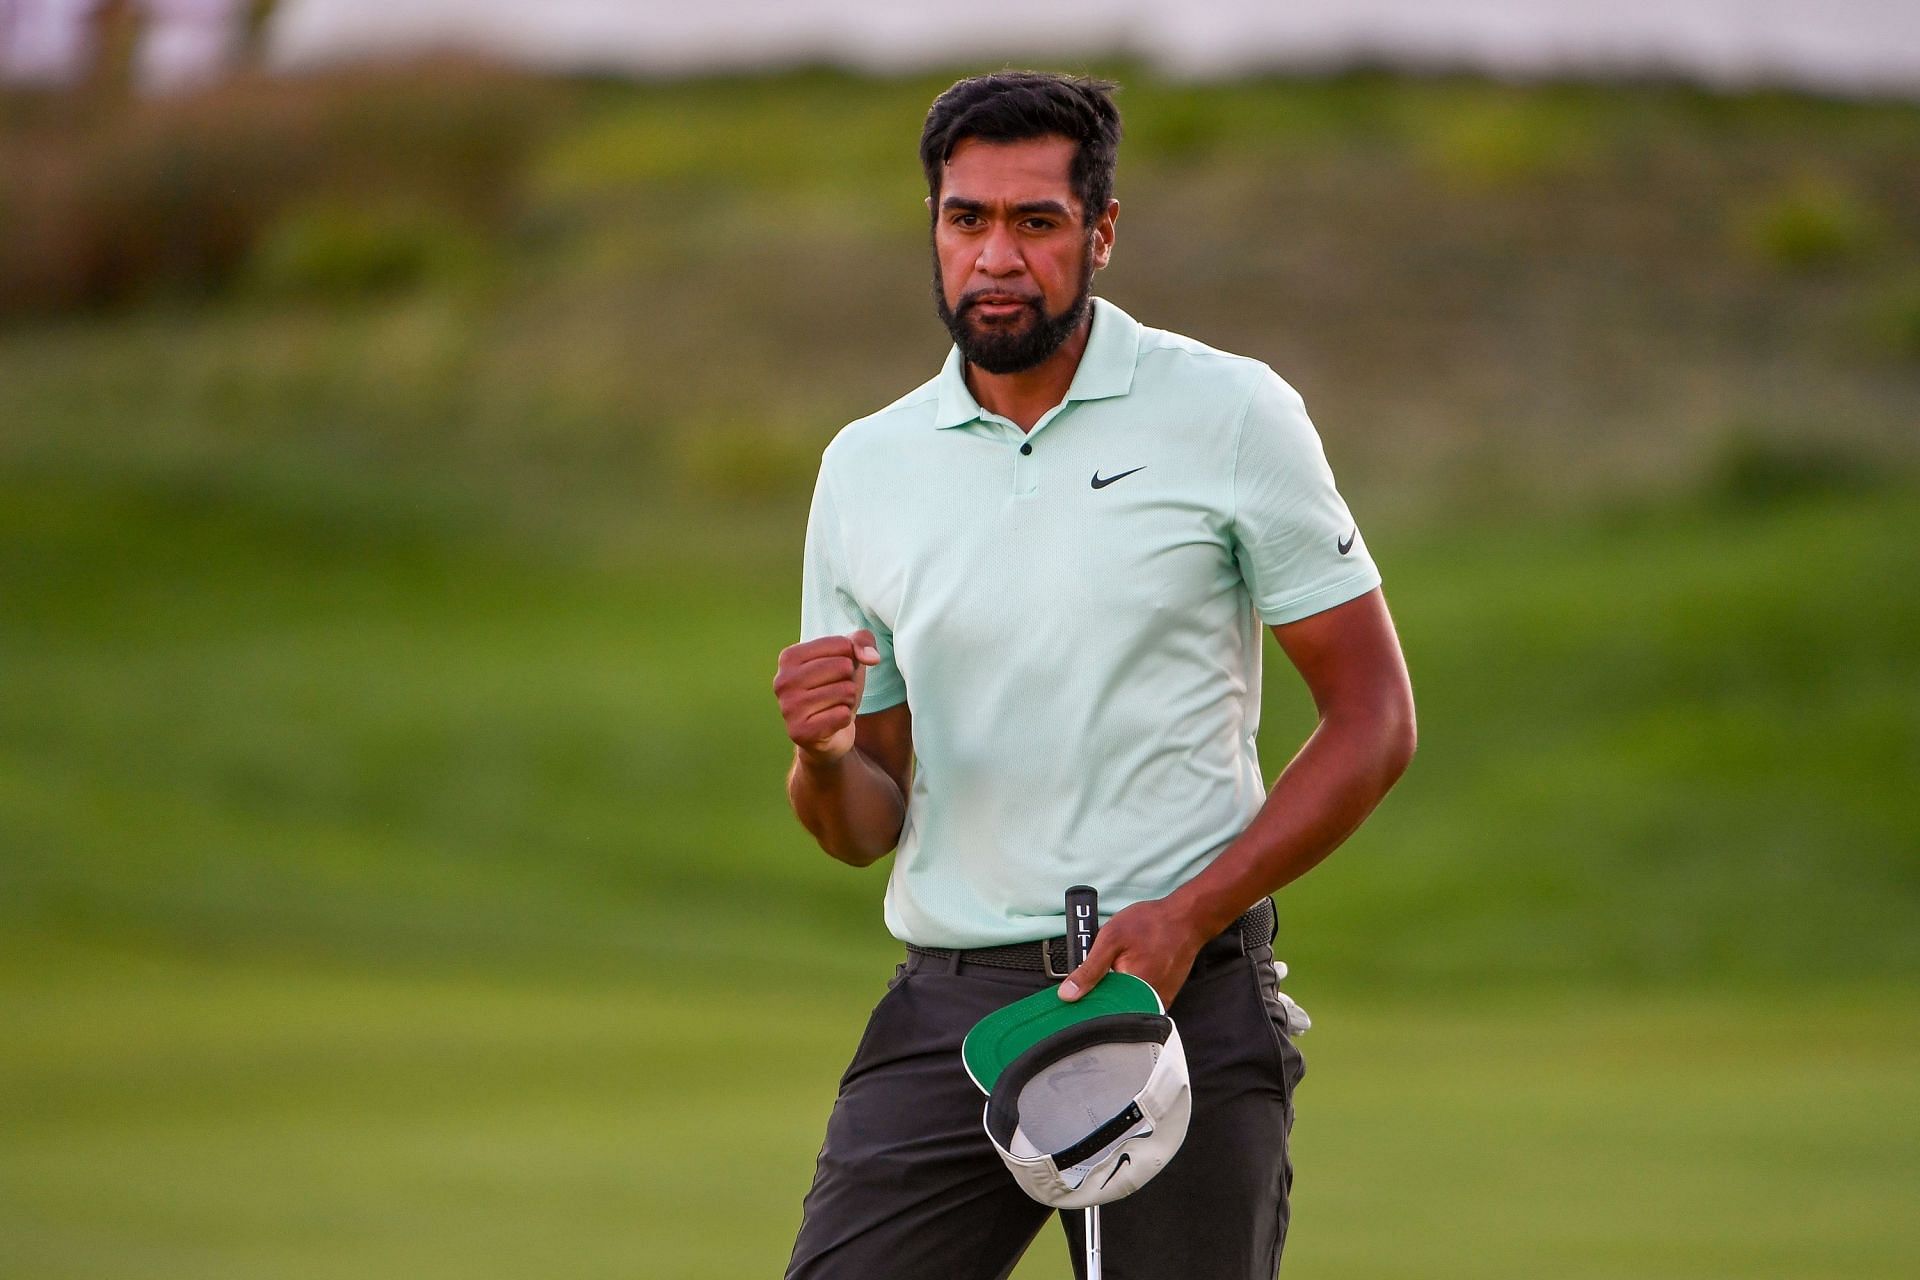 &quot;It got to a point where it felt like they were just a fly on the wall,&quot; Tony Finau on &quot;Full Swing&quot; crew following them everywhere